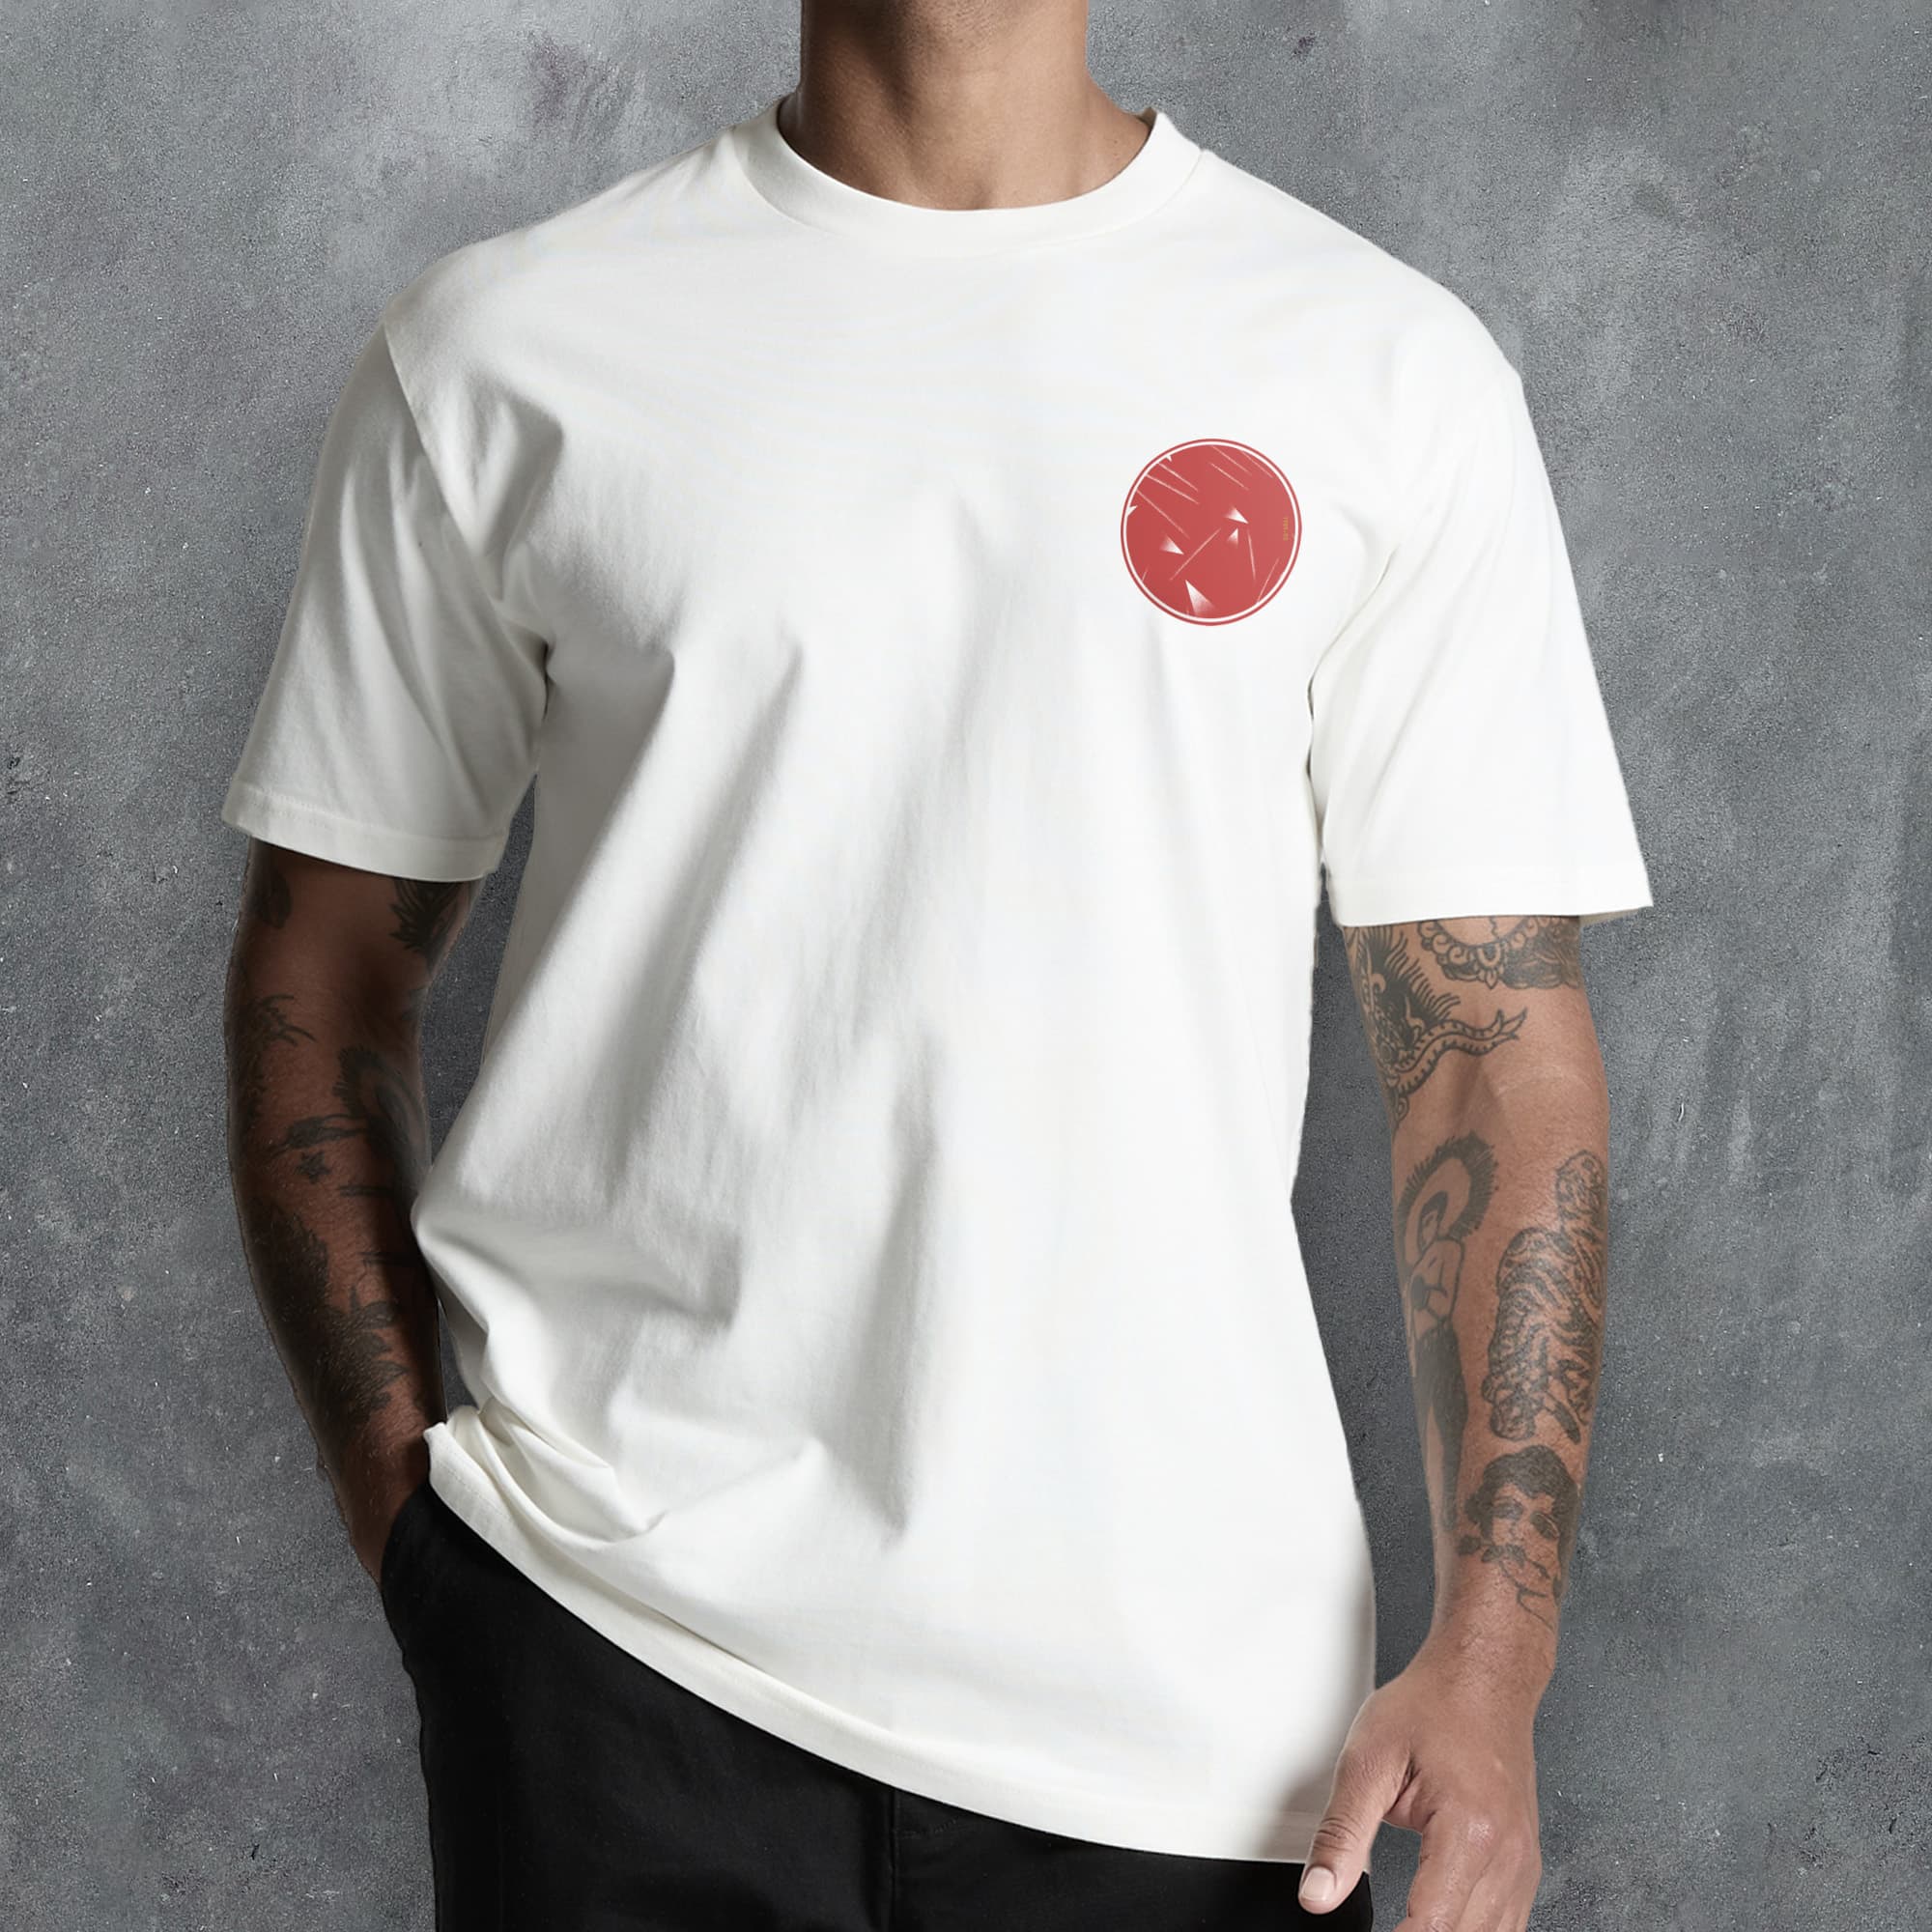 a man wearing a white t - shirt with a red smiley face on it